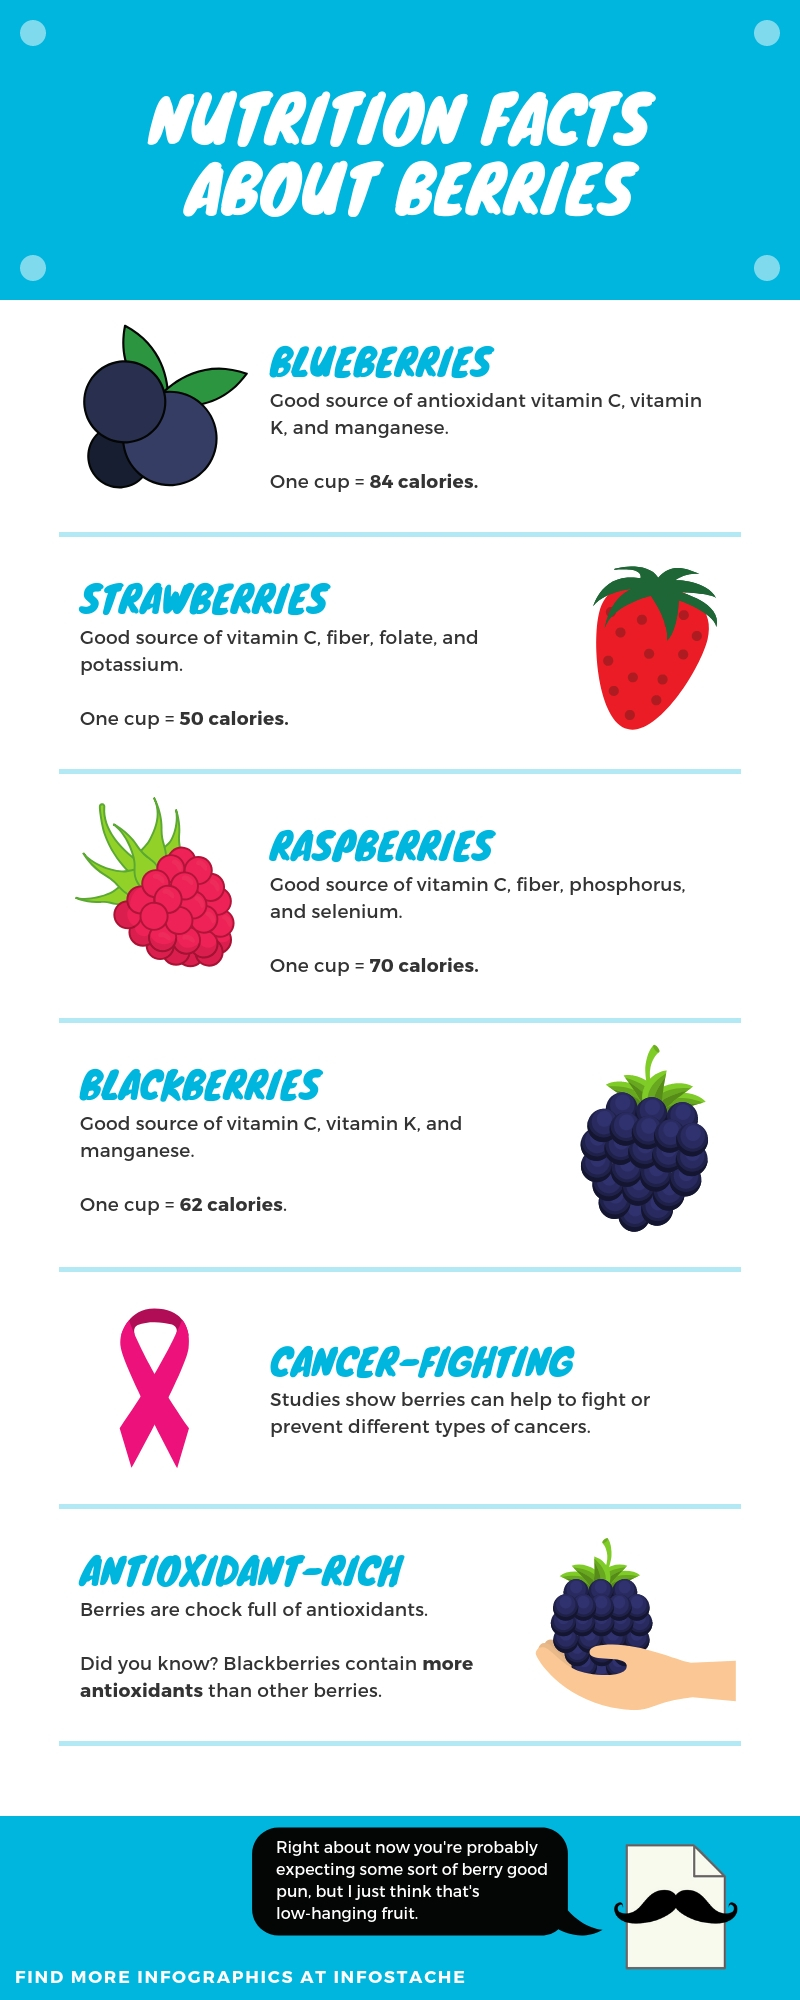 Nutrition Facts About Berries - Infographic